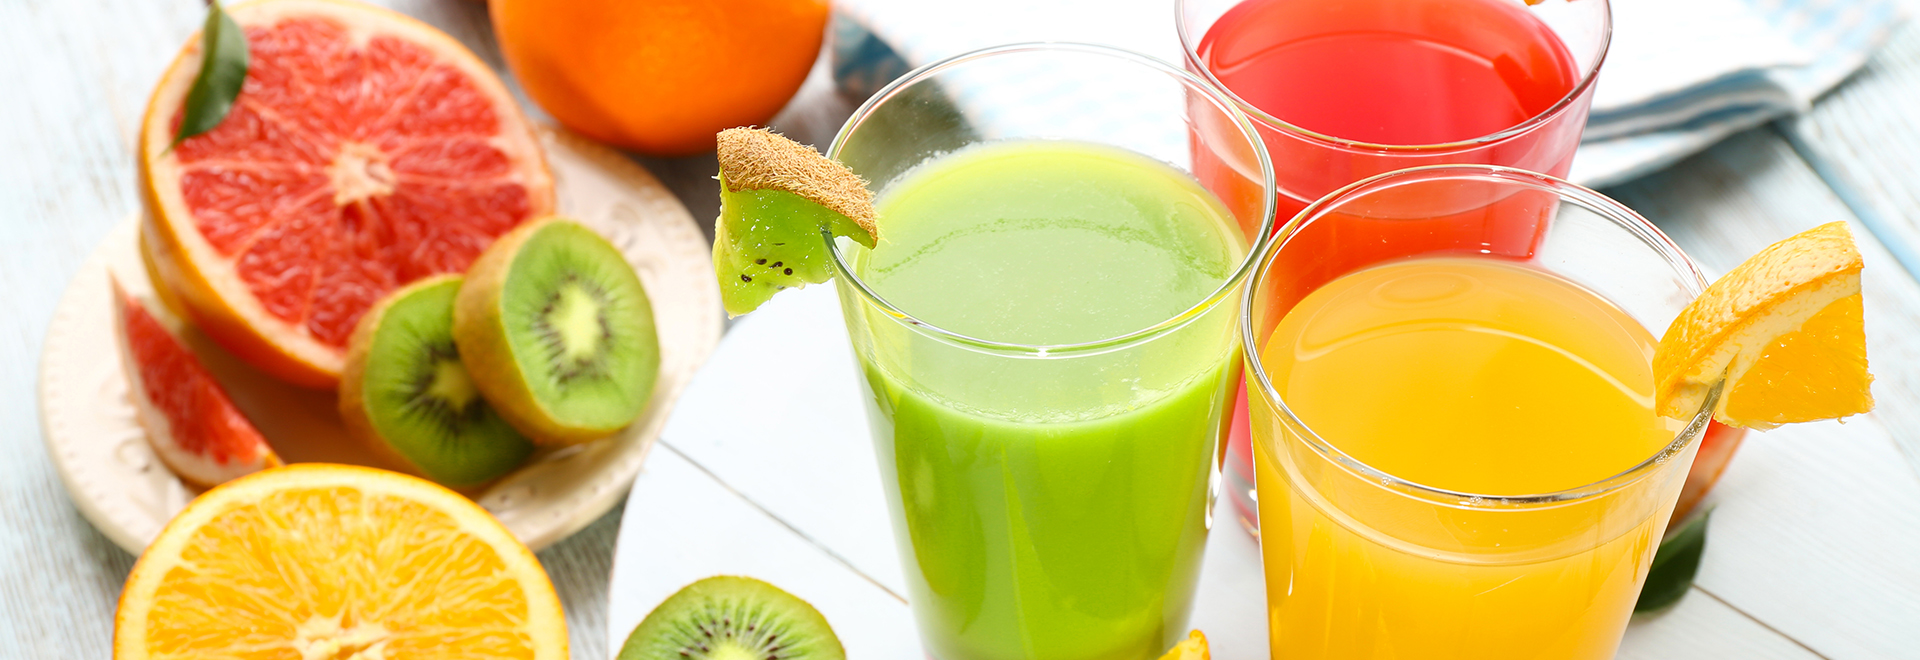 fruit-juice-for-weight-loss-good-or-bad